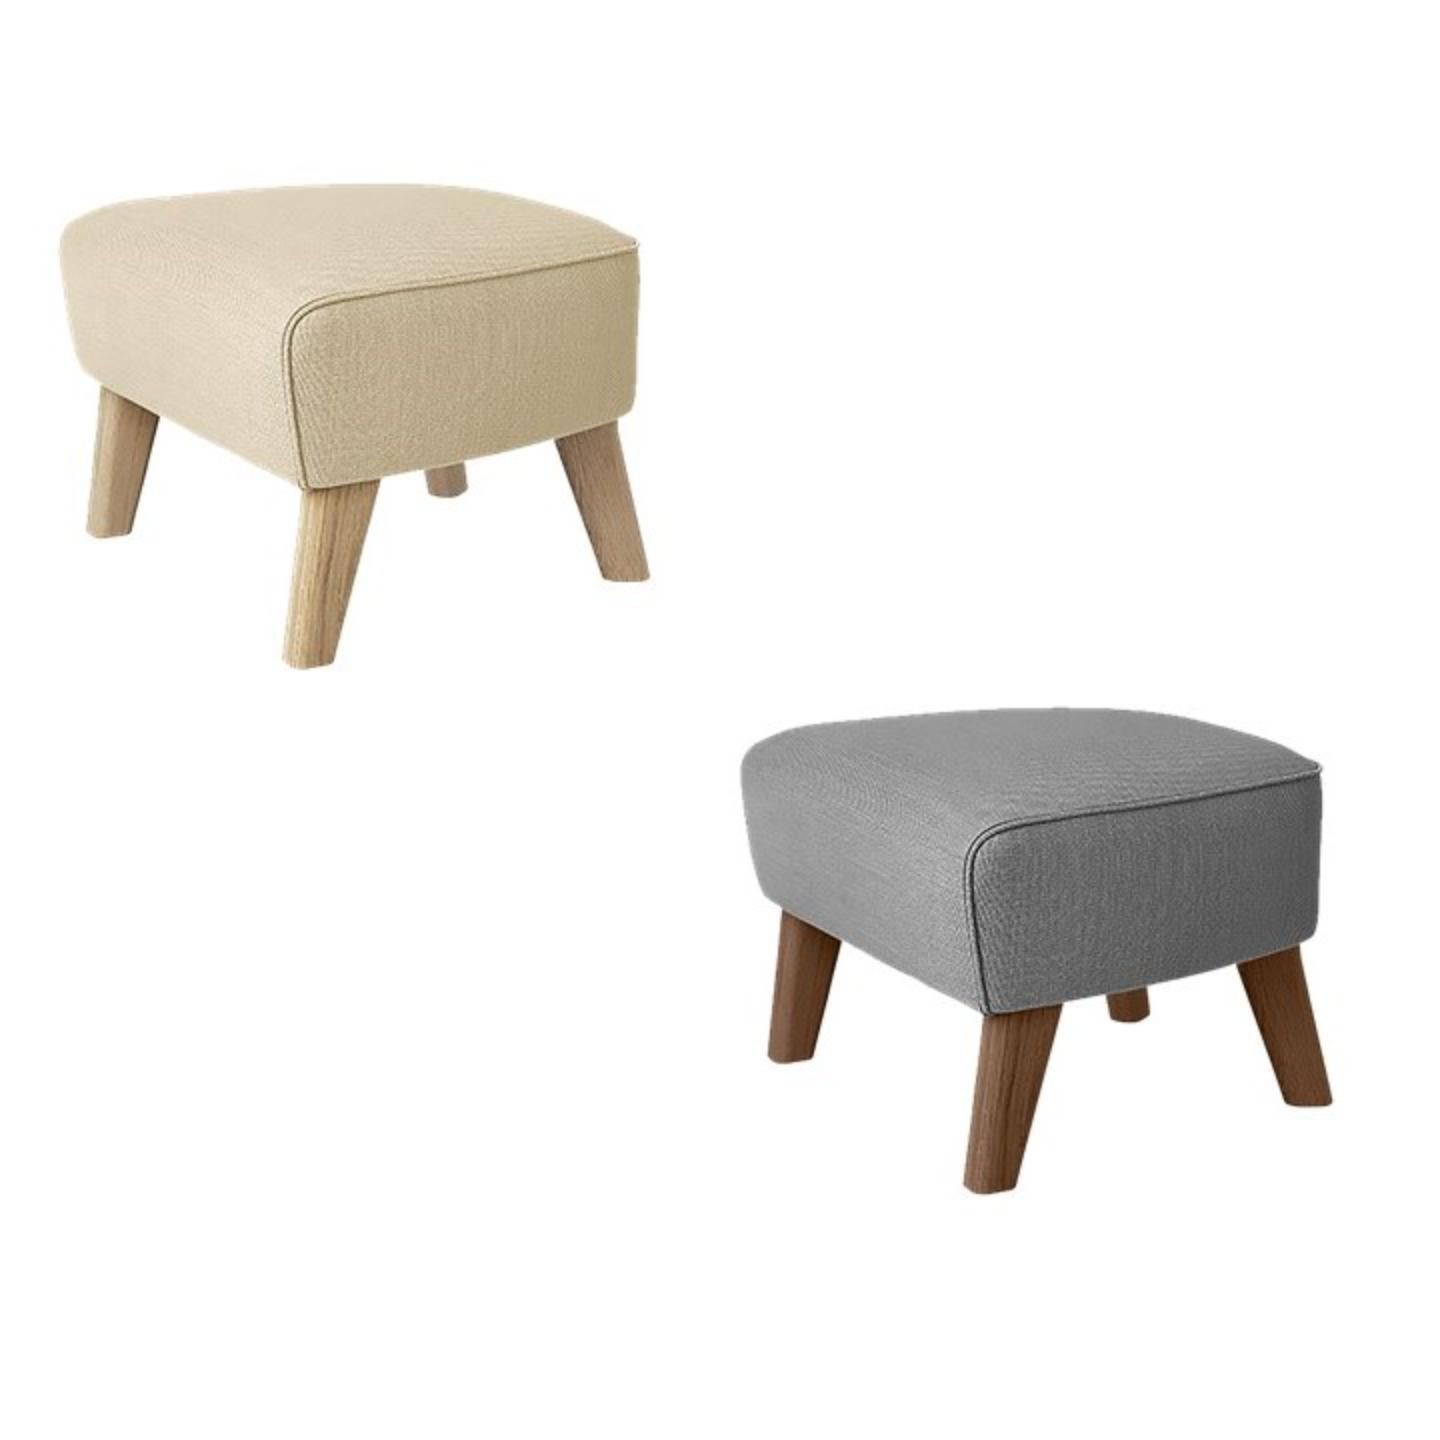 Other Set of 4 Beige and Smoked Oak Sahco Zero Footstool by Lassen For Sale